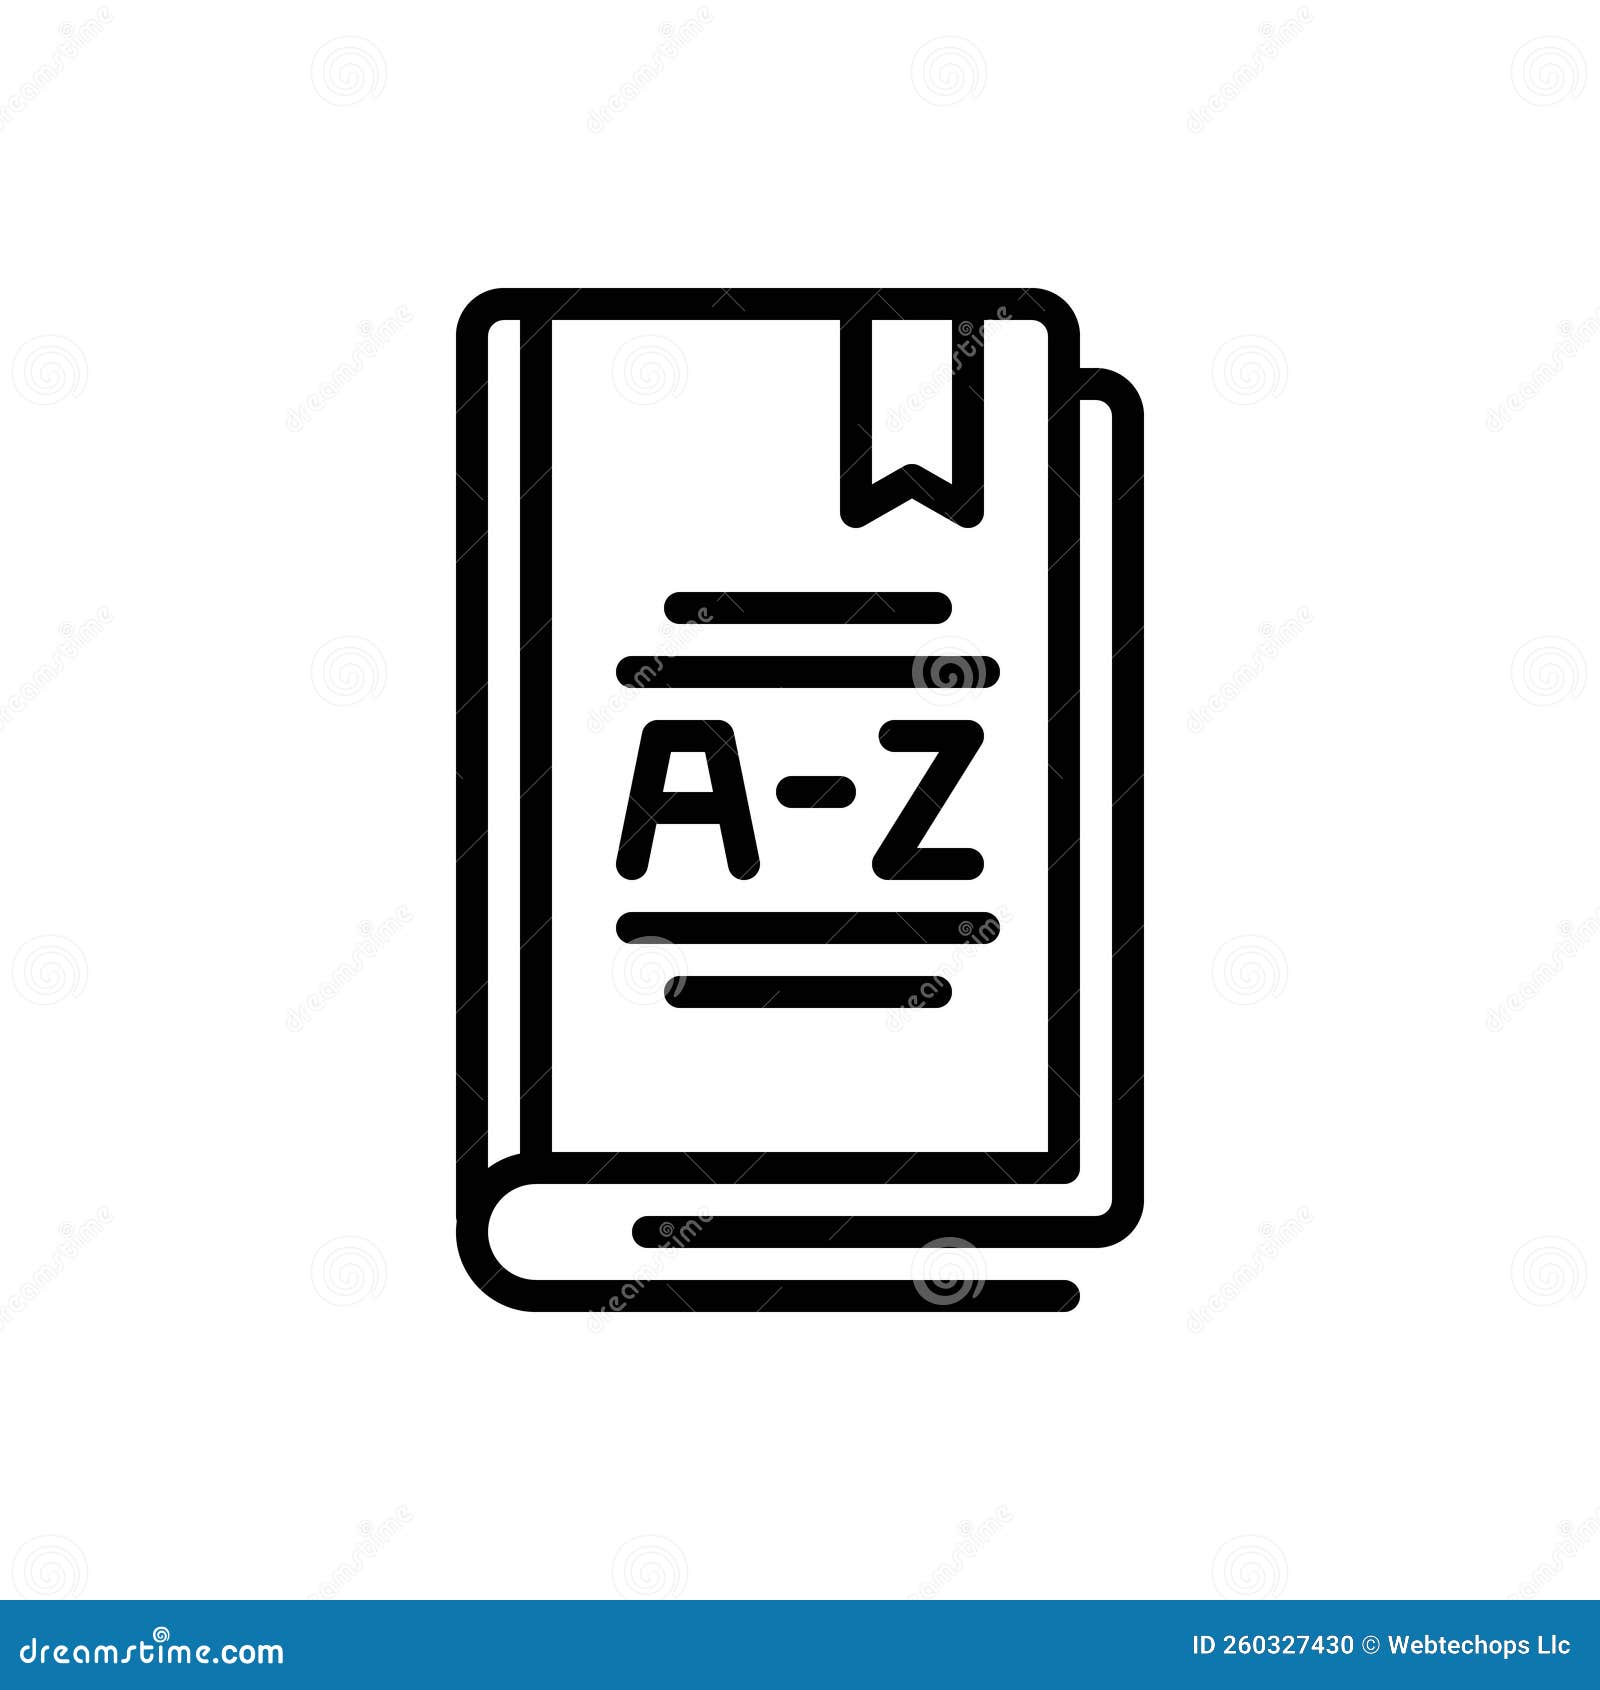 black line icon for dictionaries, lexicon and vocabulary